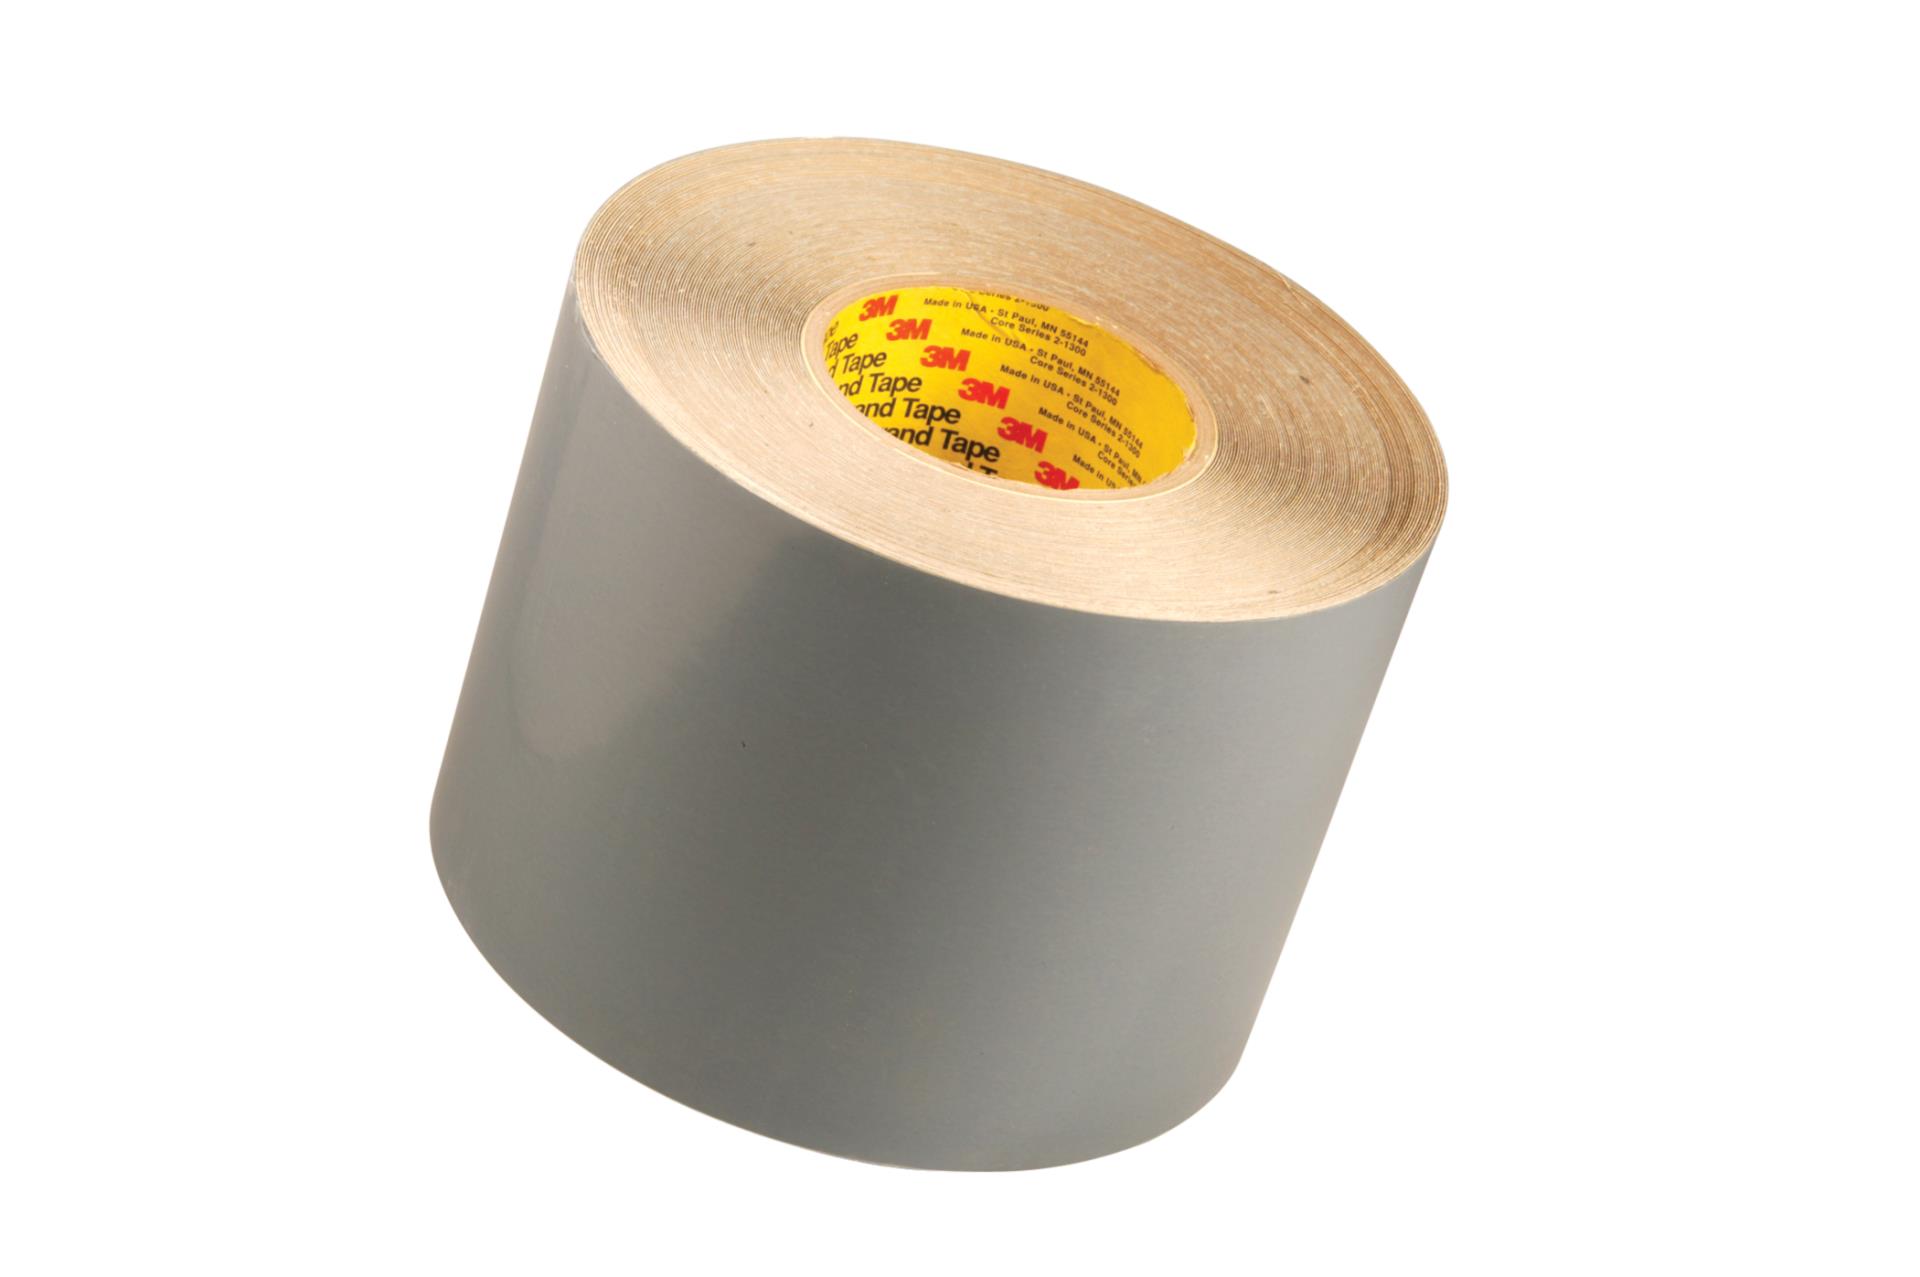 300×1000mm PTFE Flim Sheet Roll Thin Plate High Temperature 0.2mm~1.5mm Thick